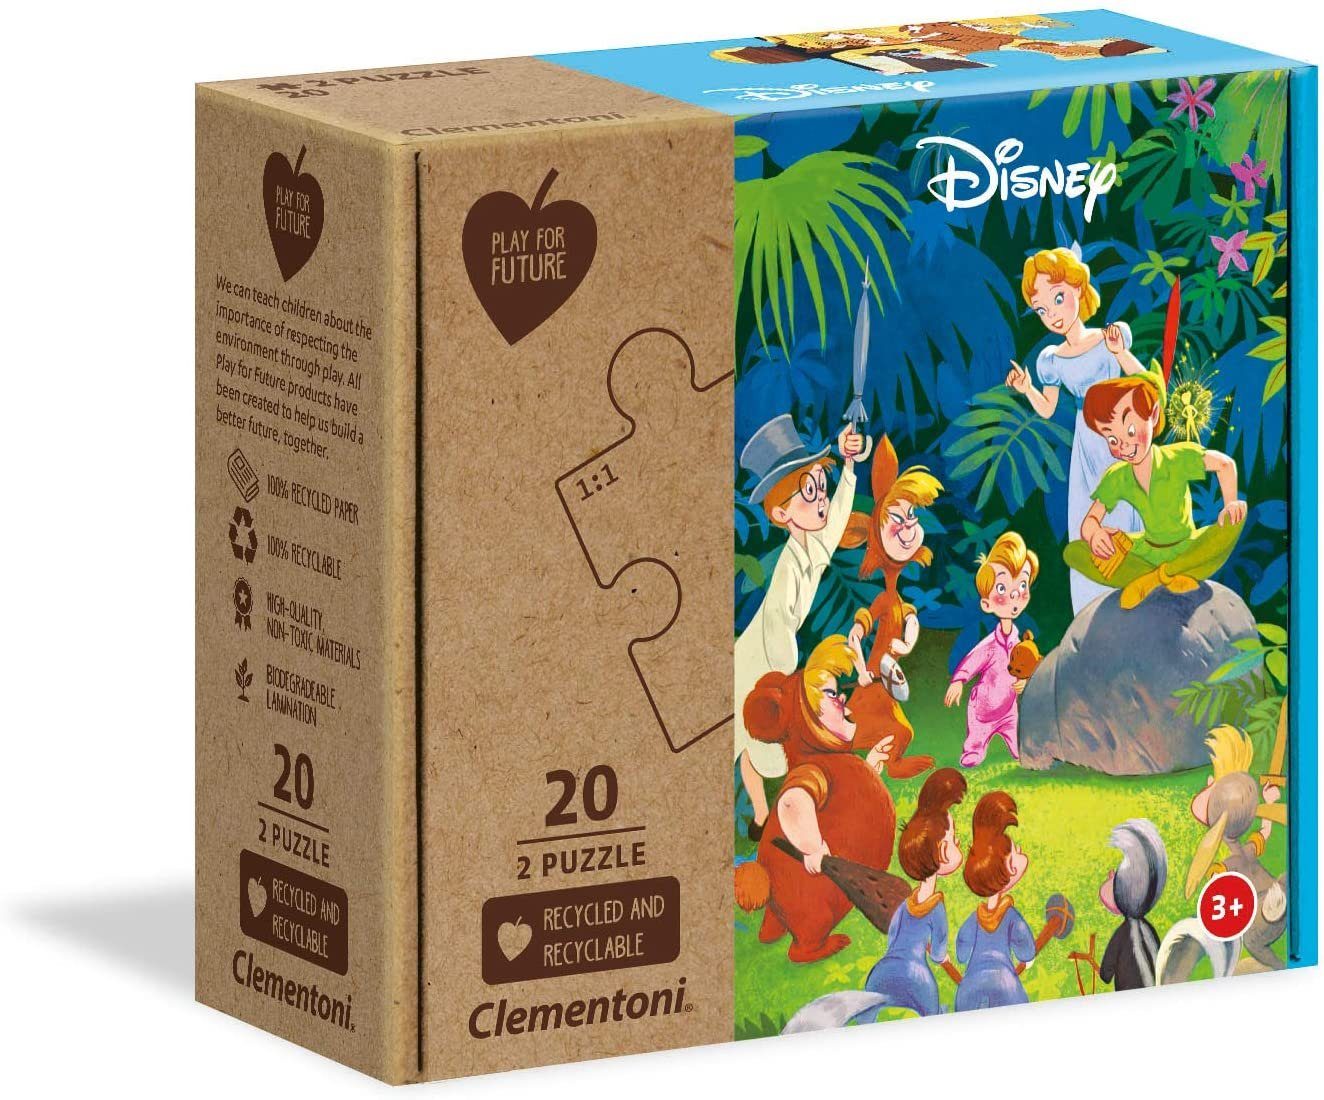 (2 & Play Peter Future x Teile), Puzzle - 20 Puzzle Clementoni® Dschungelbuch Pan Puzzleteile for